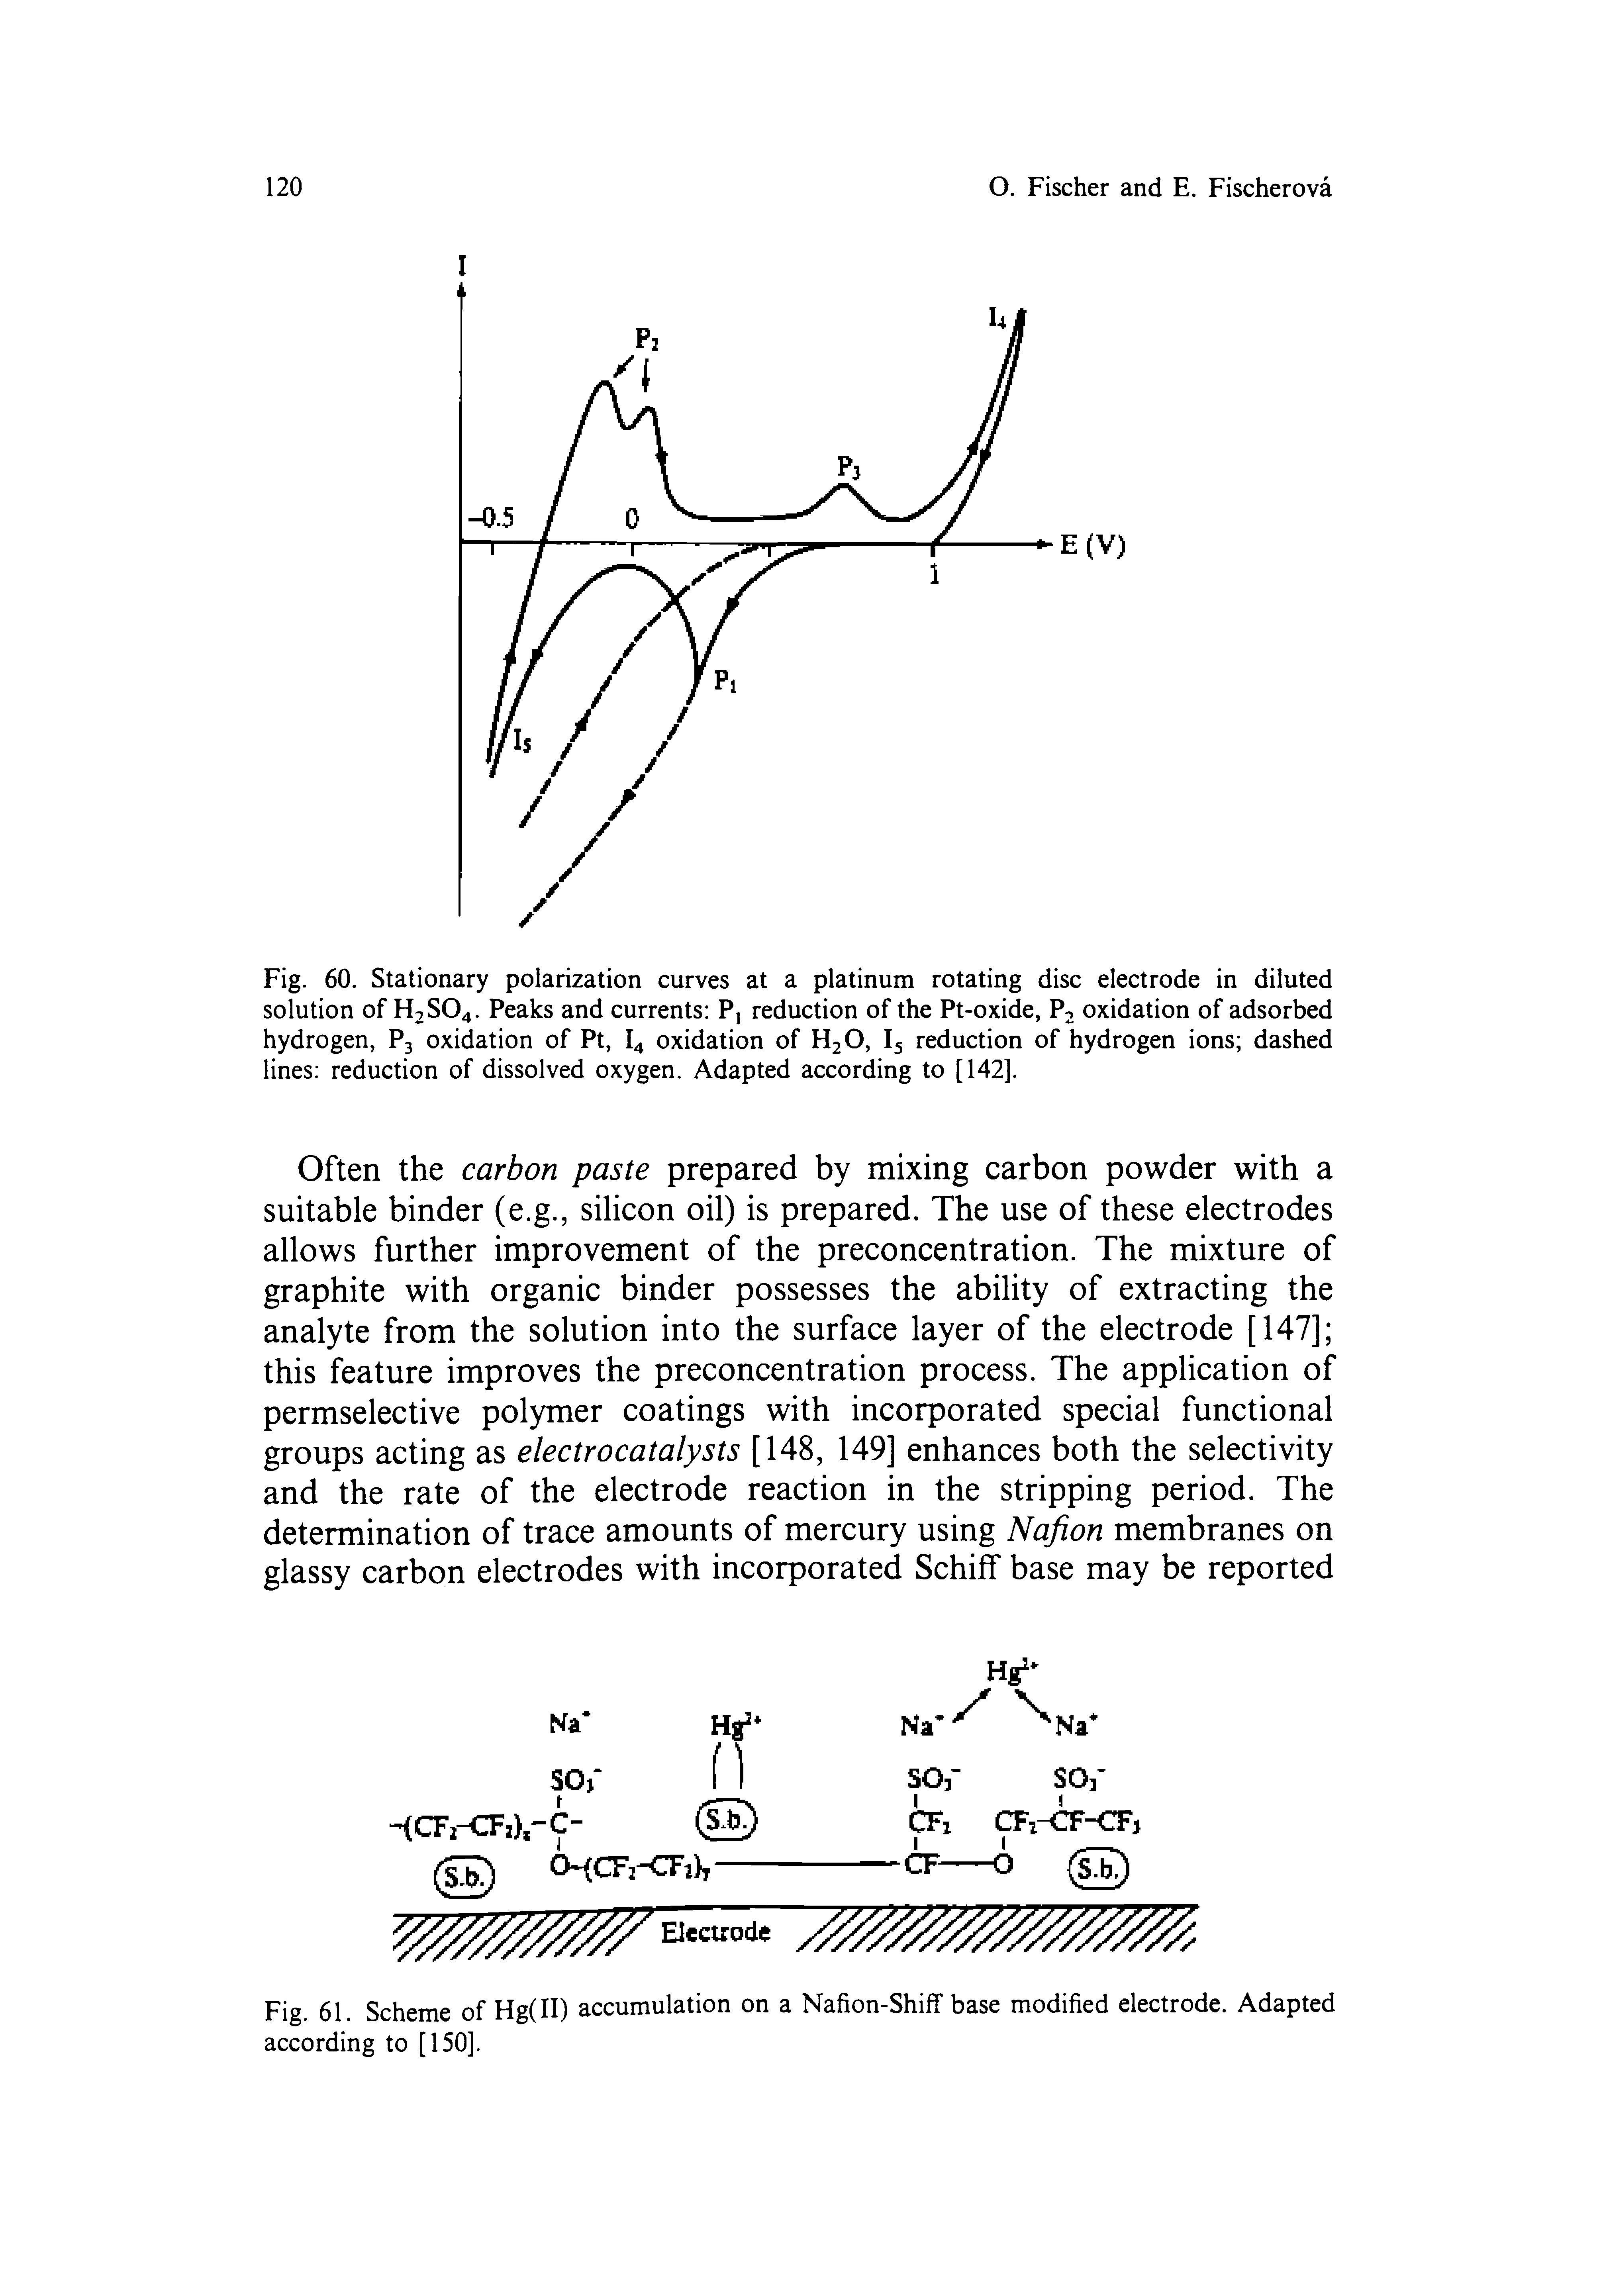 Fig. 60. Stationary polarization curves at a platinum rotating disc electrode in diluted solution of H2SO4. Peaks and currents Pj reduction of the Pt-oxide, P2 oxidation of adsorbed hydrogen, P3 oxidation of Pt, I4 oxidation of H2O, I5 reduction of hydrogen ions dashed lines reduction of dissolved oxygen. Adapted according to [142].